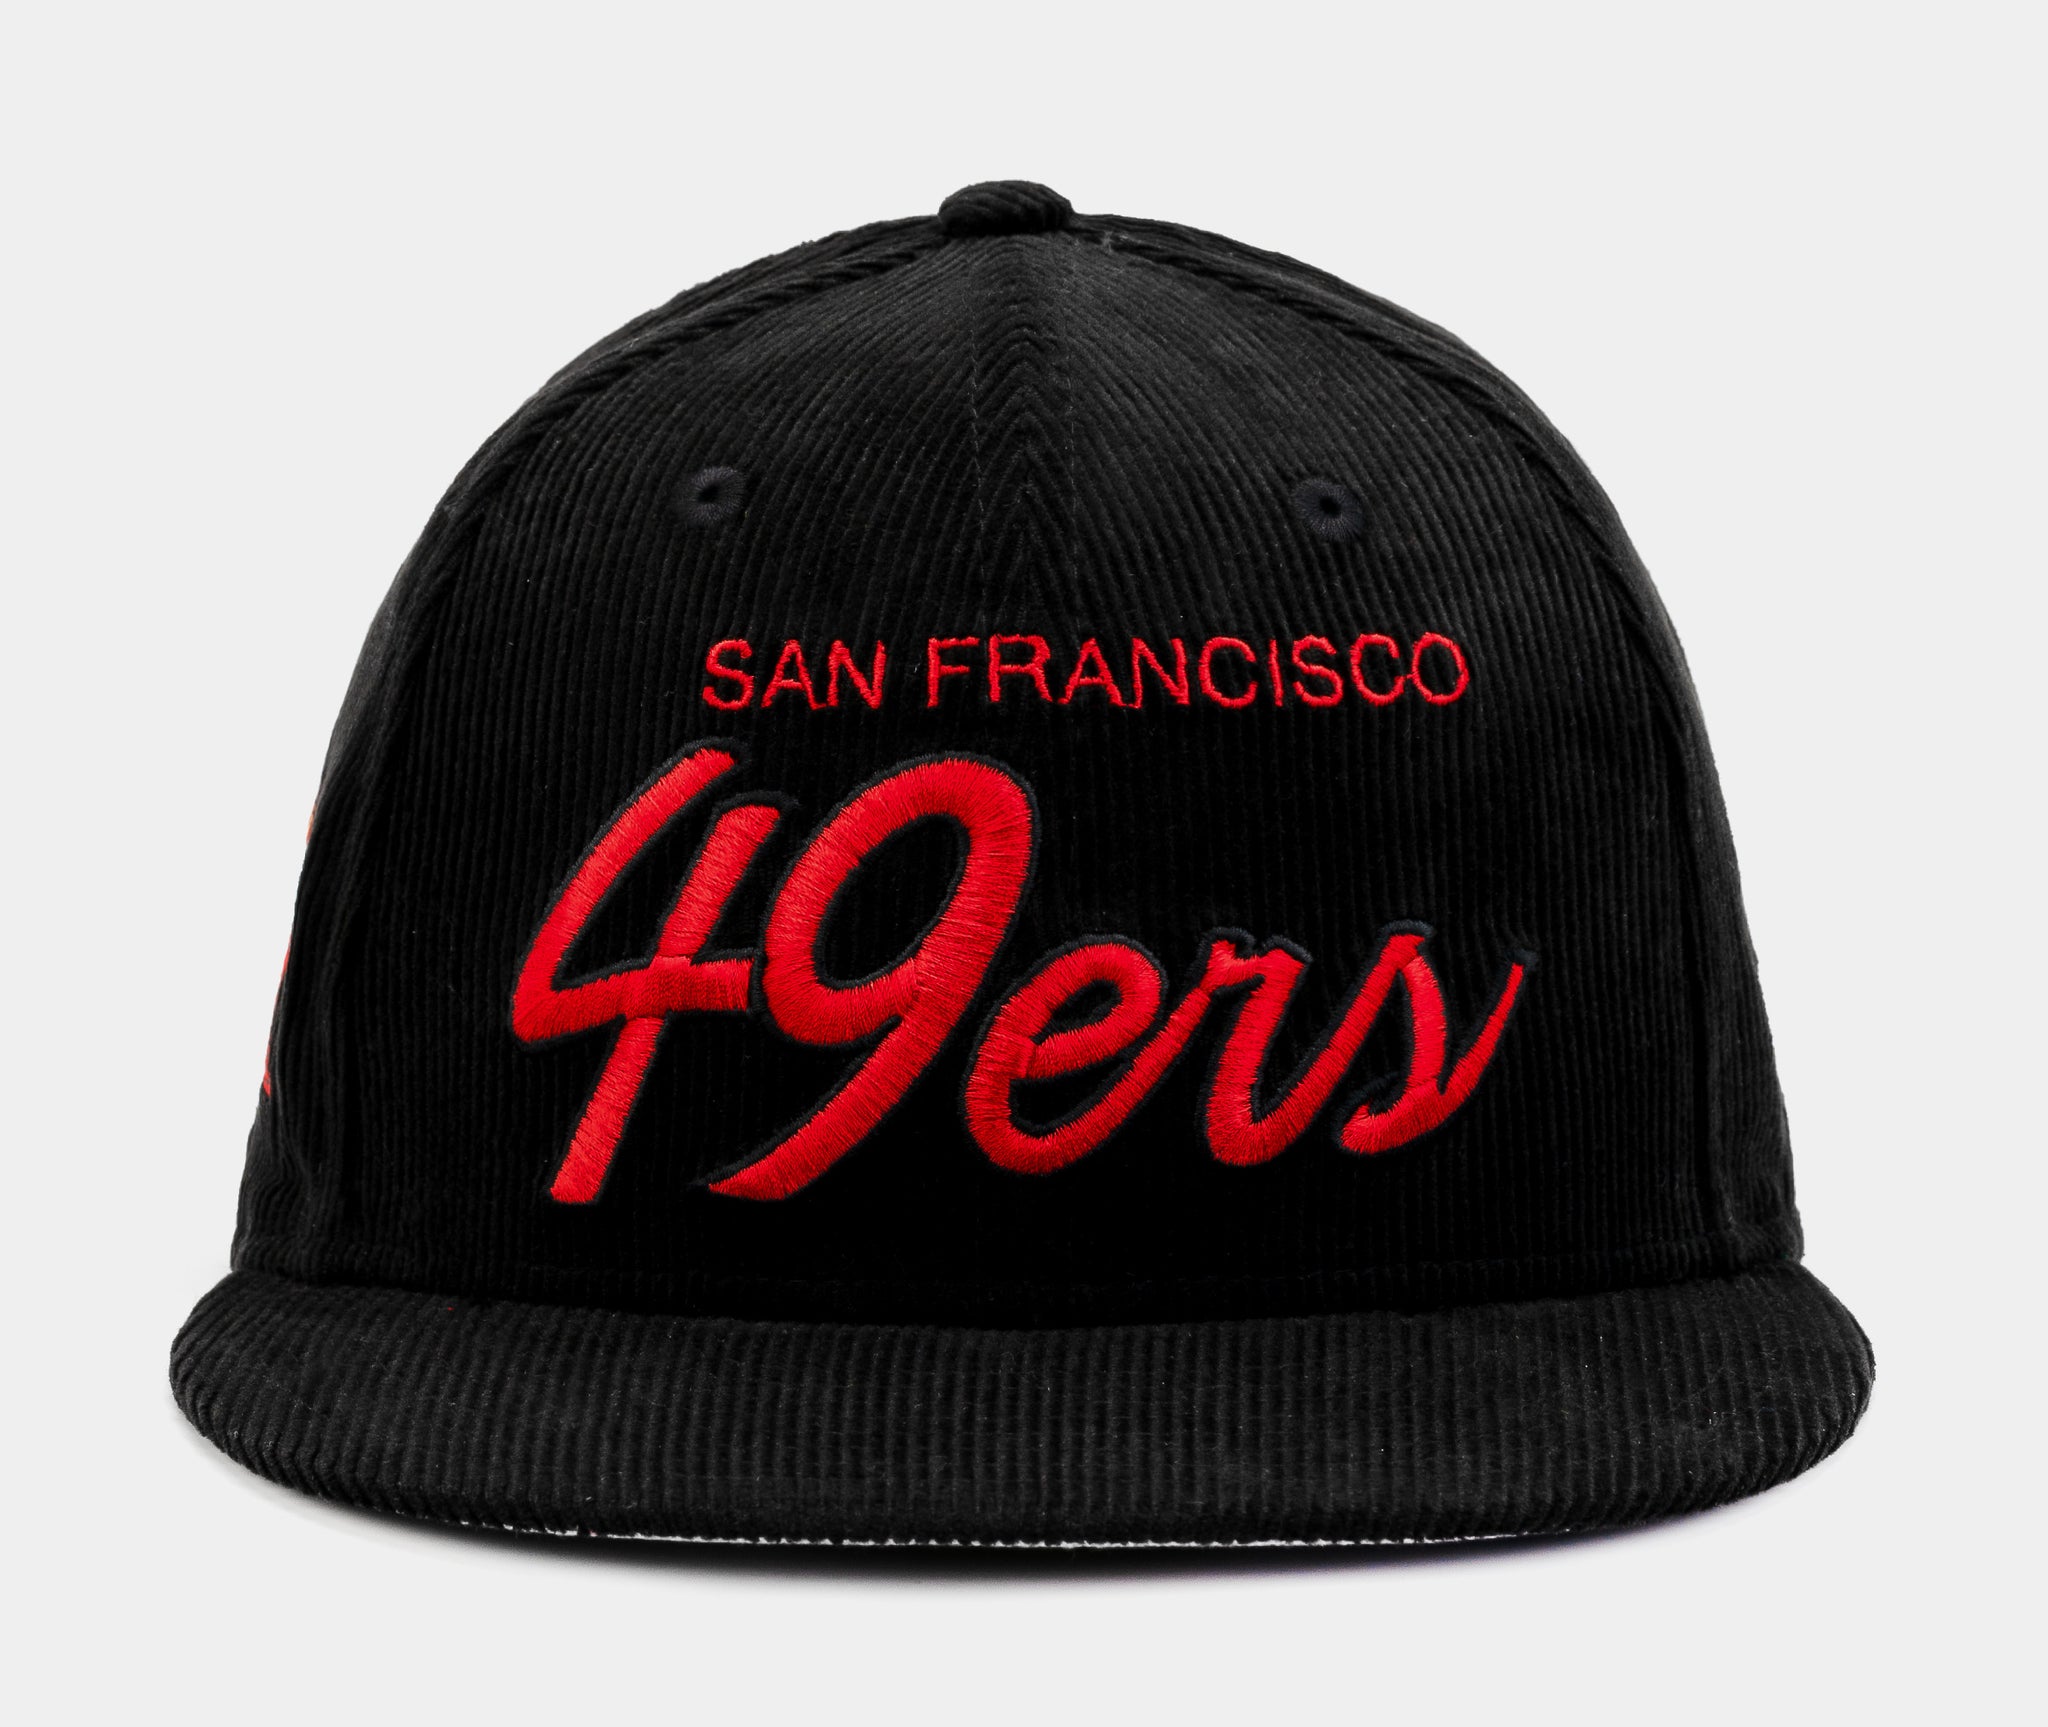 san francisco 49ers logo feature 59fifty fitted